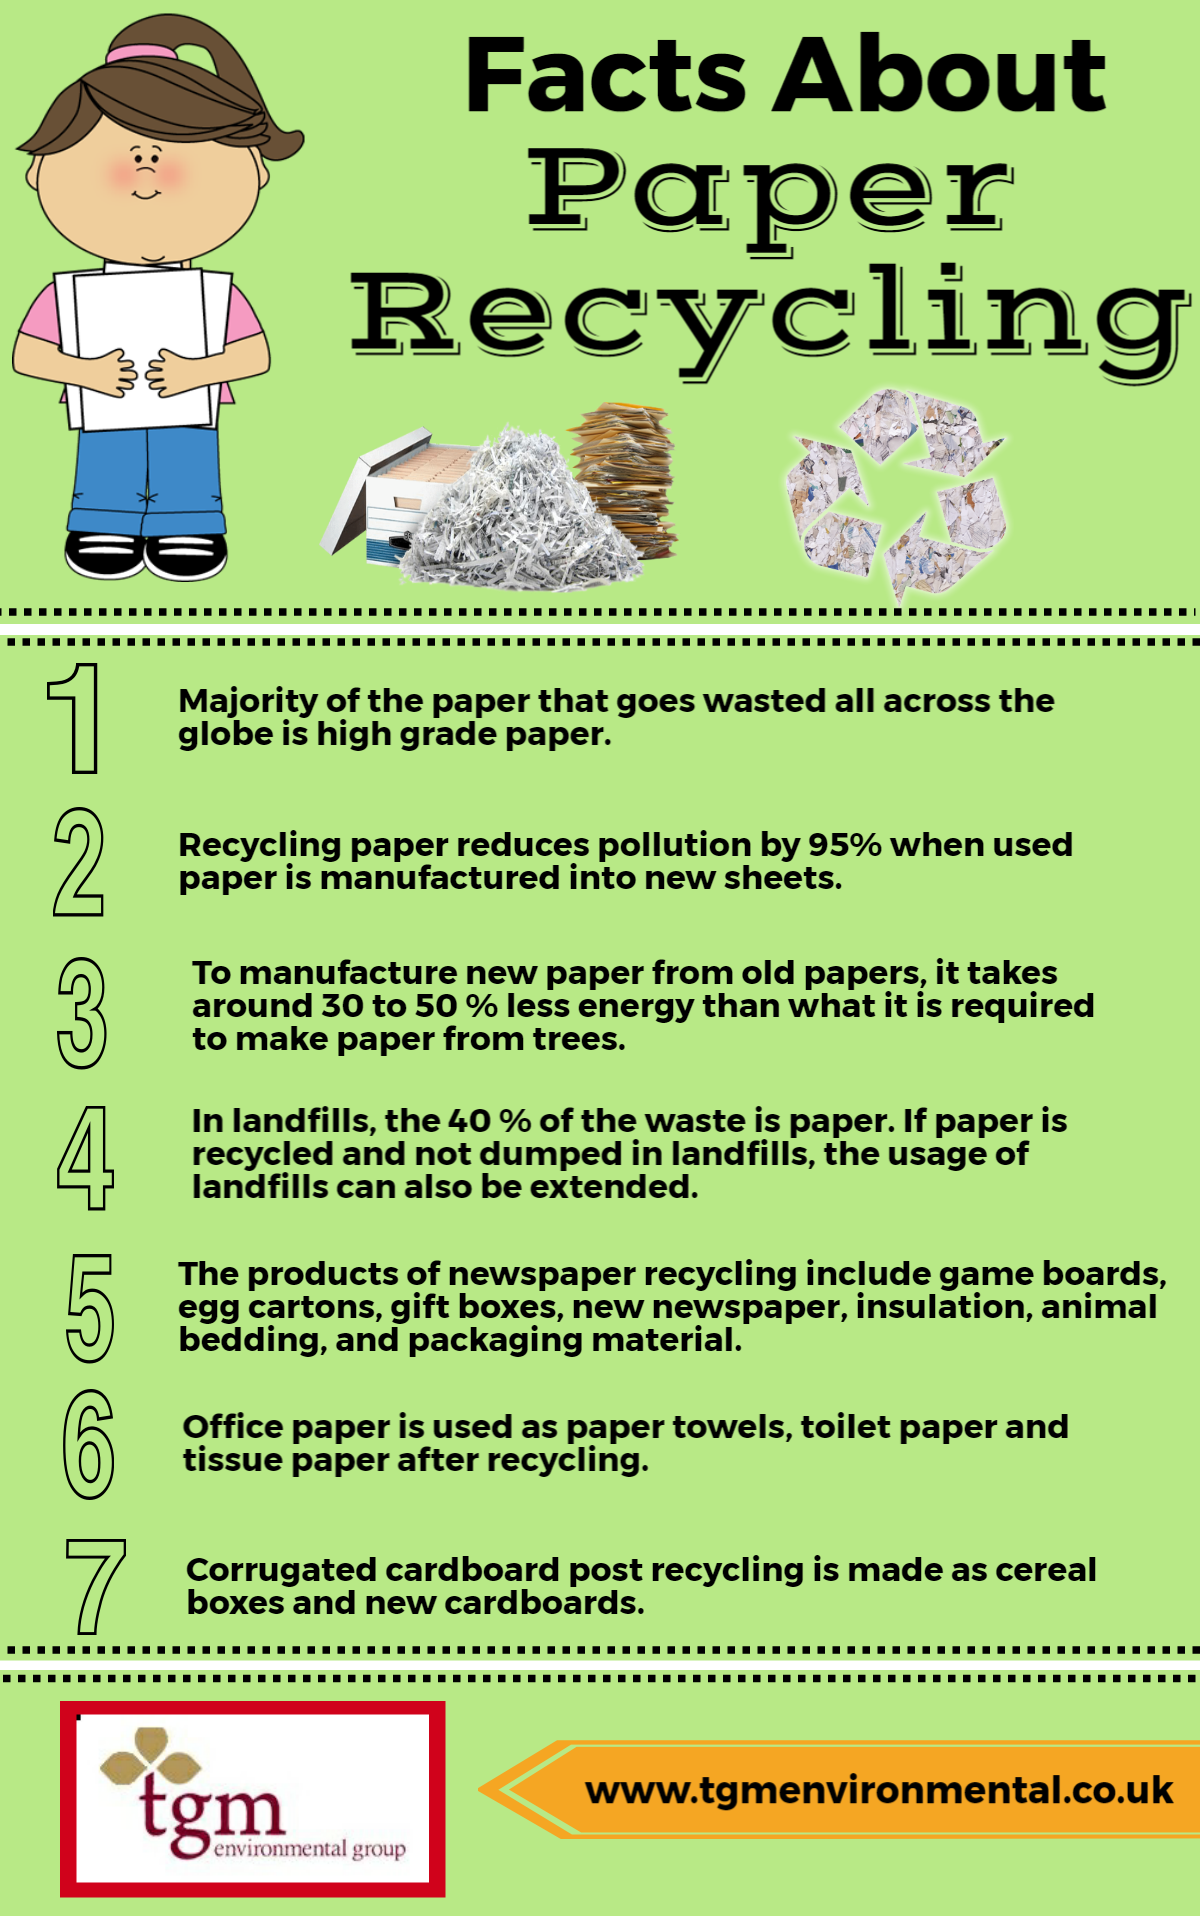 Facts About Paper Recycling | by TGM Environmental | Medium